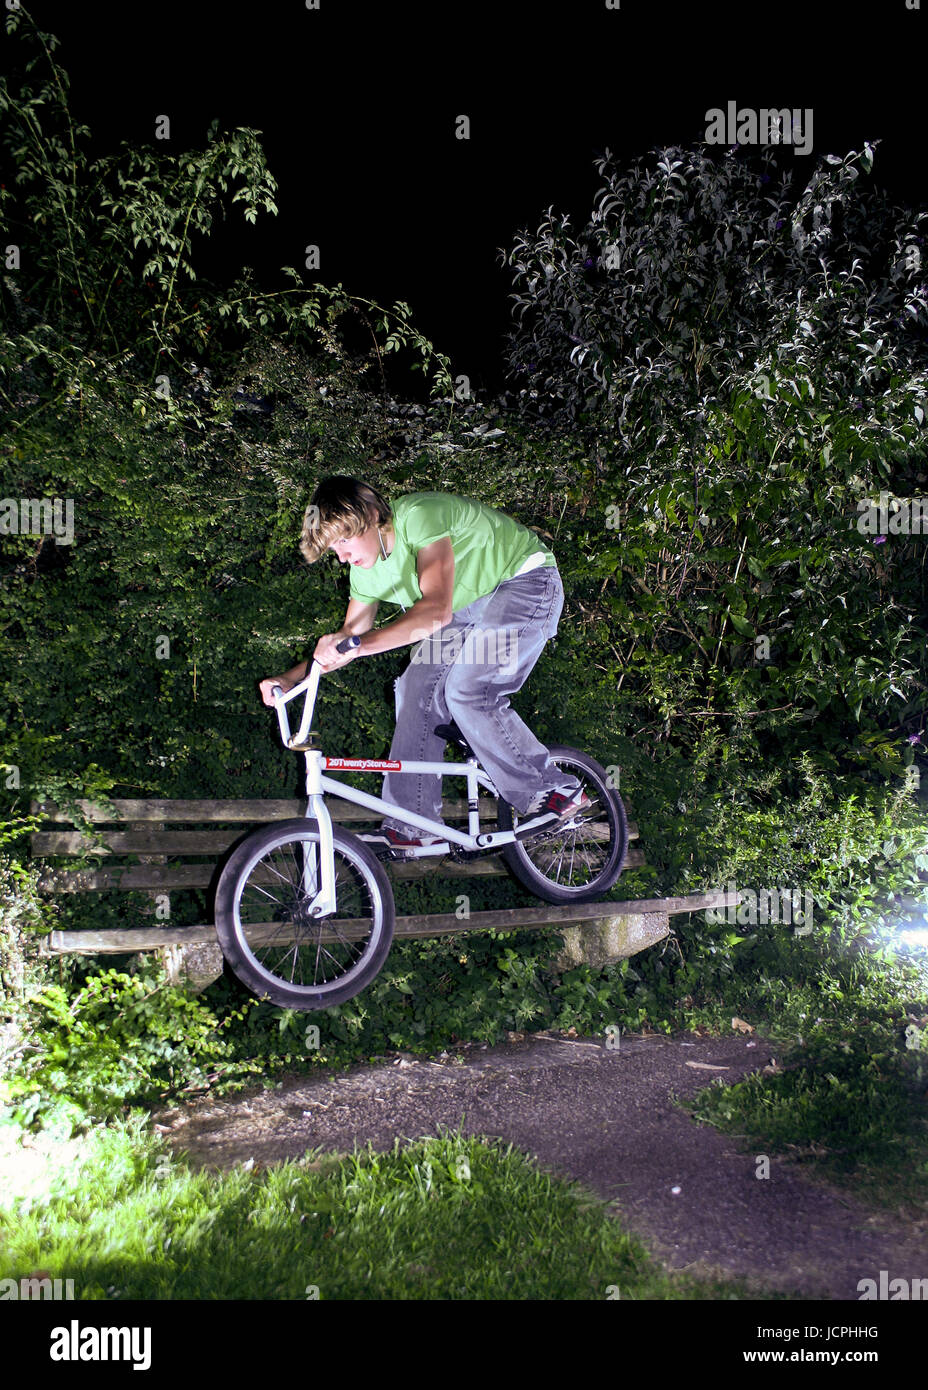 A BMXer does a trick Stock Photo